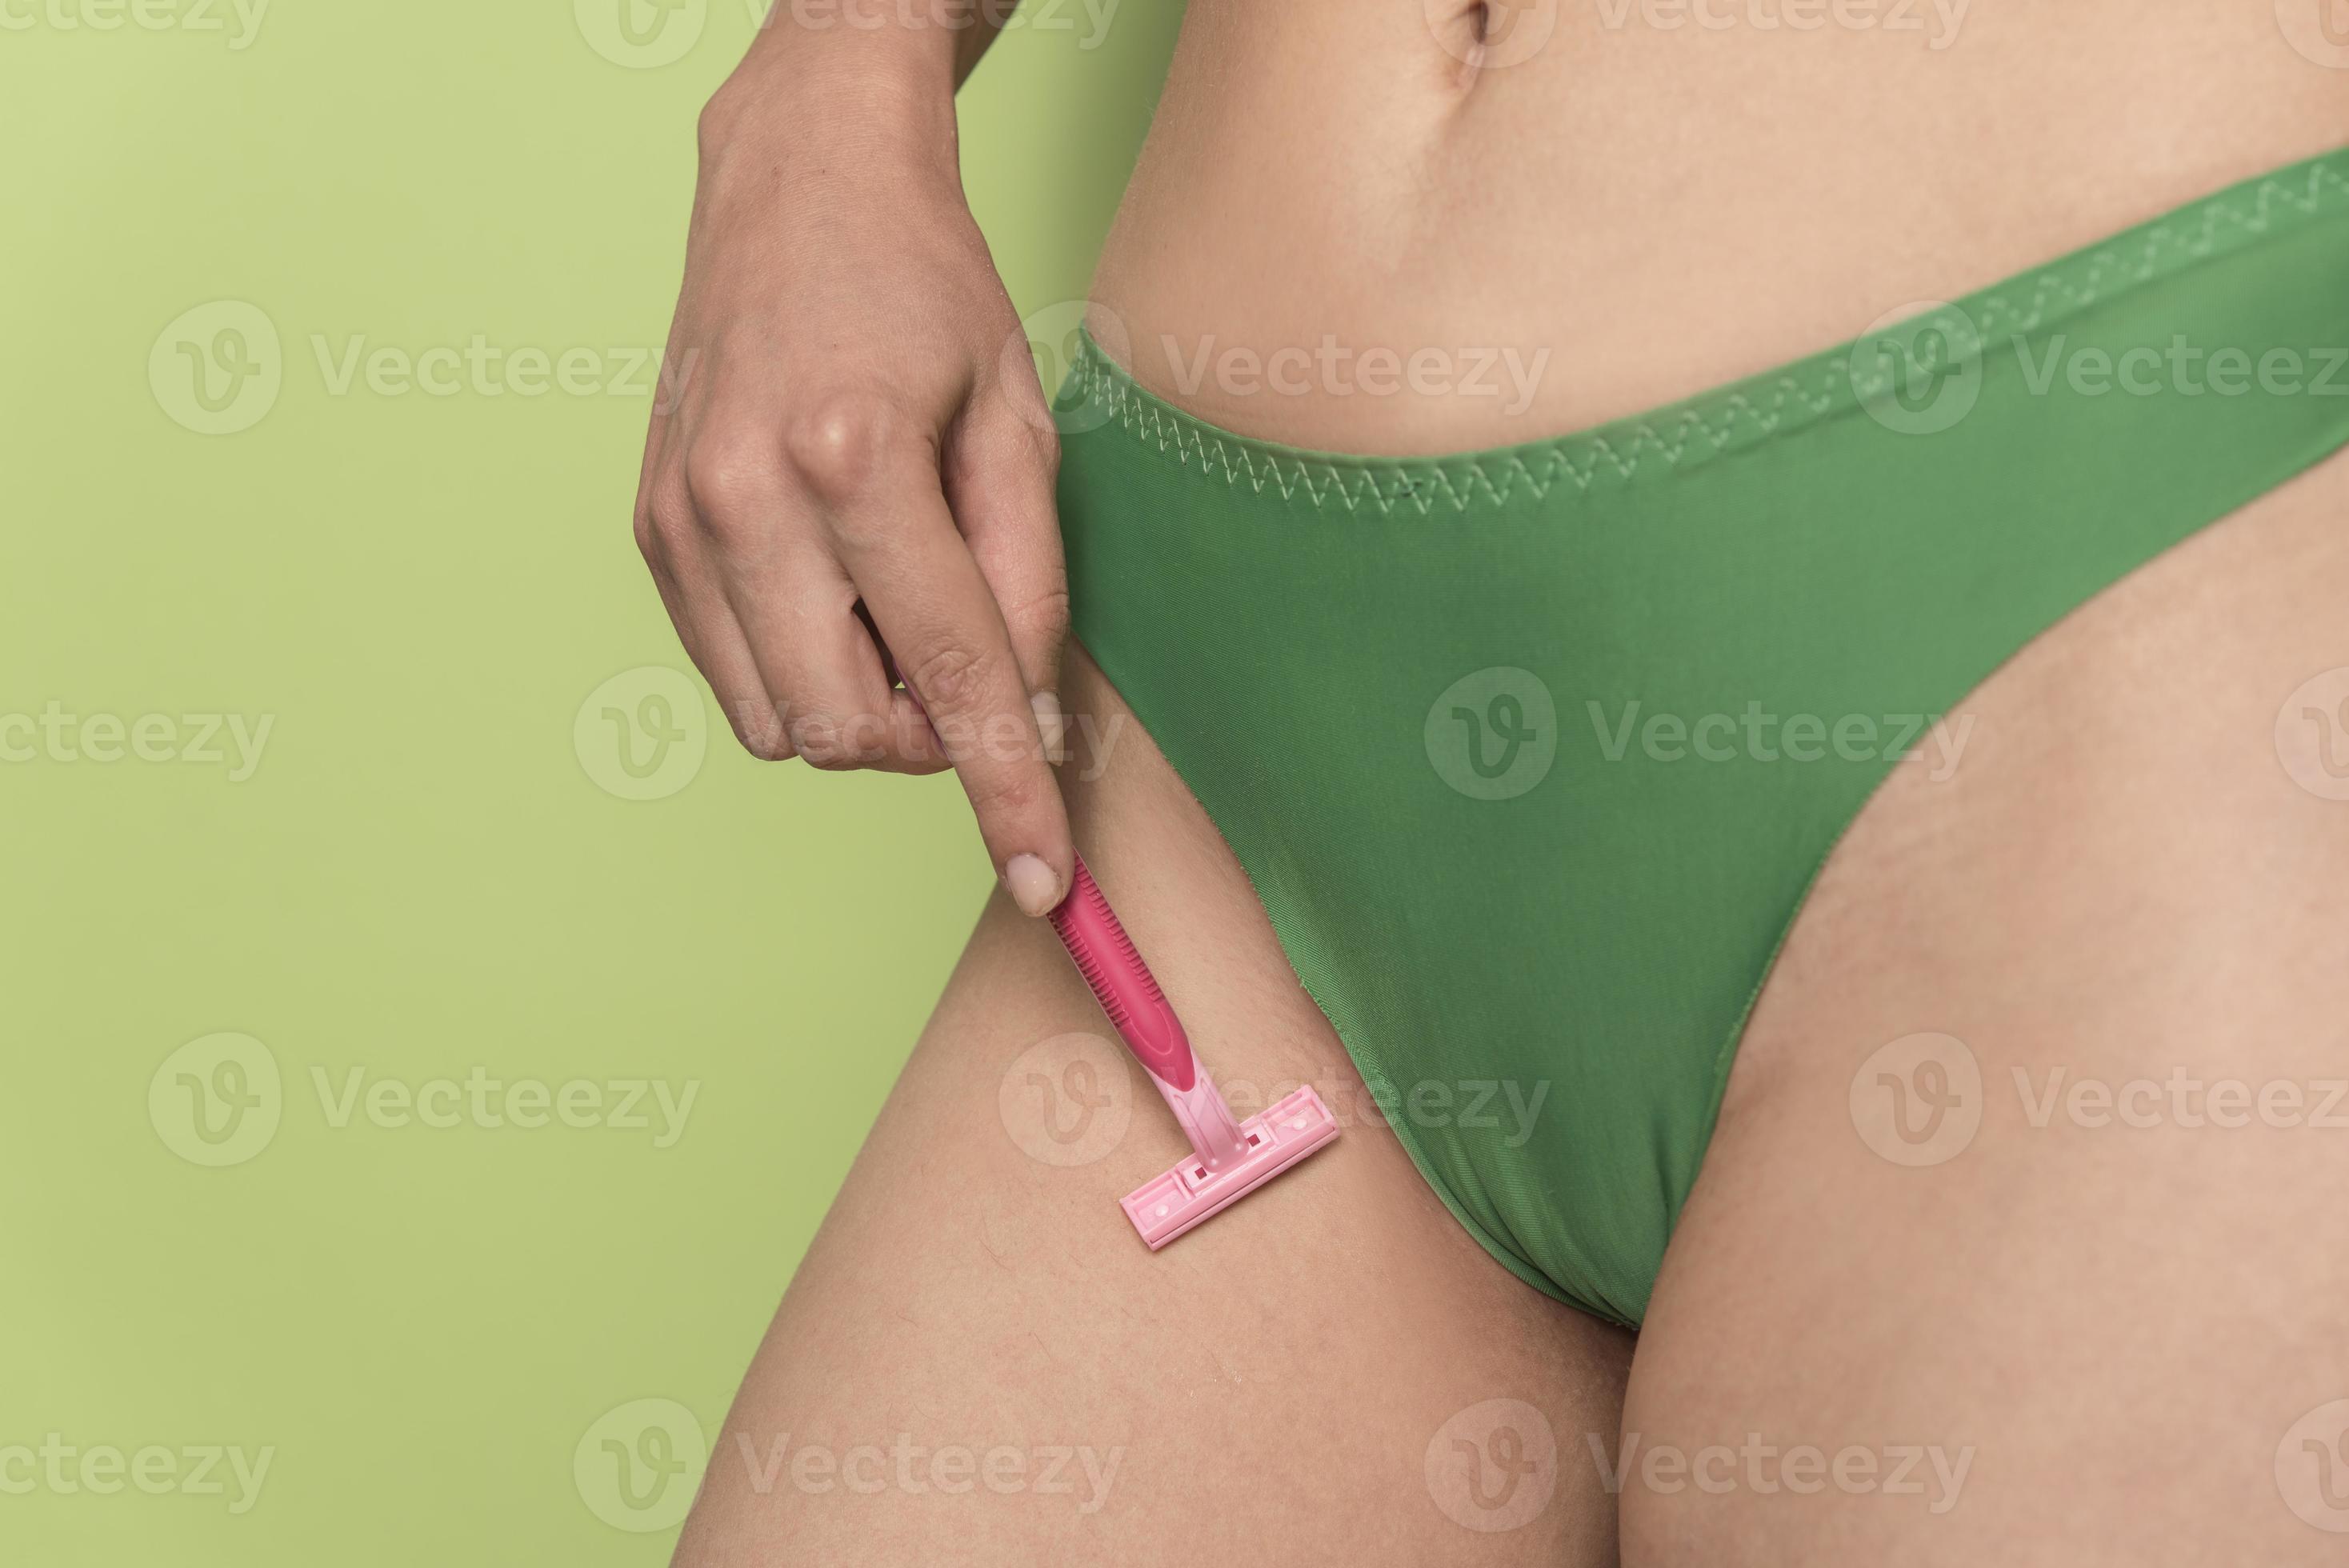 https://static.vecteezy.com/system/resources/previews/016/690/406/large_2x/woman-in-panties-shaved-her-crotch-with-razor-photo.jpg